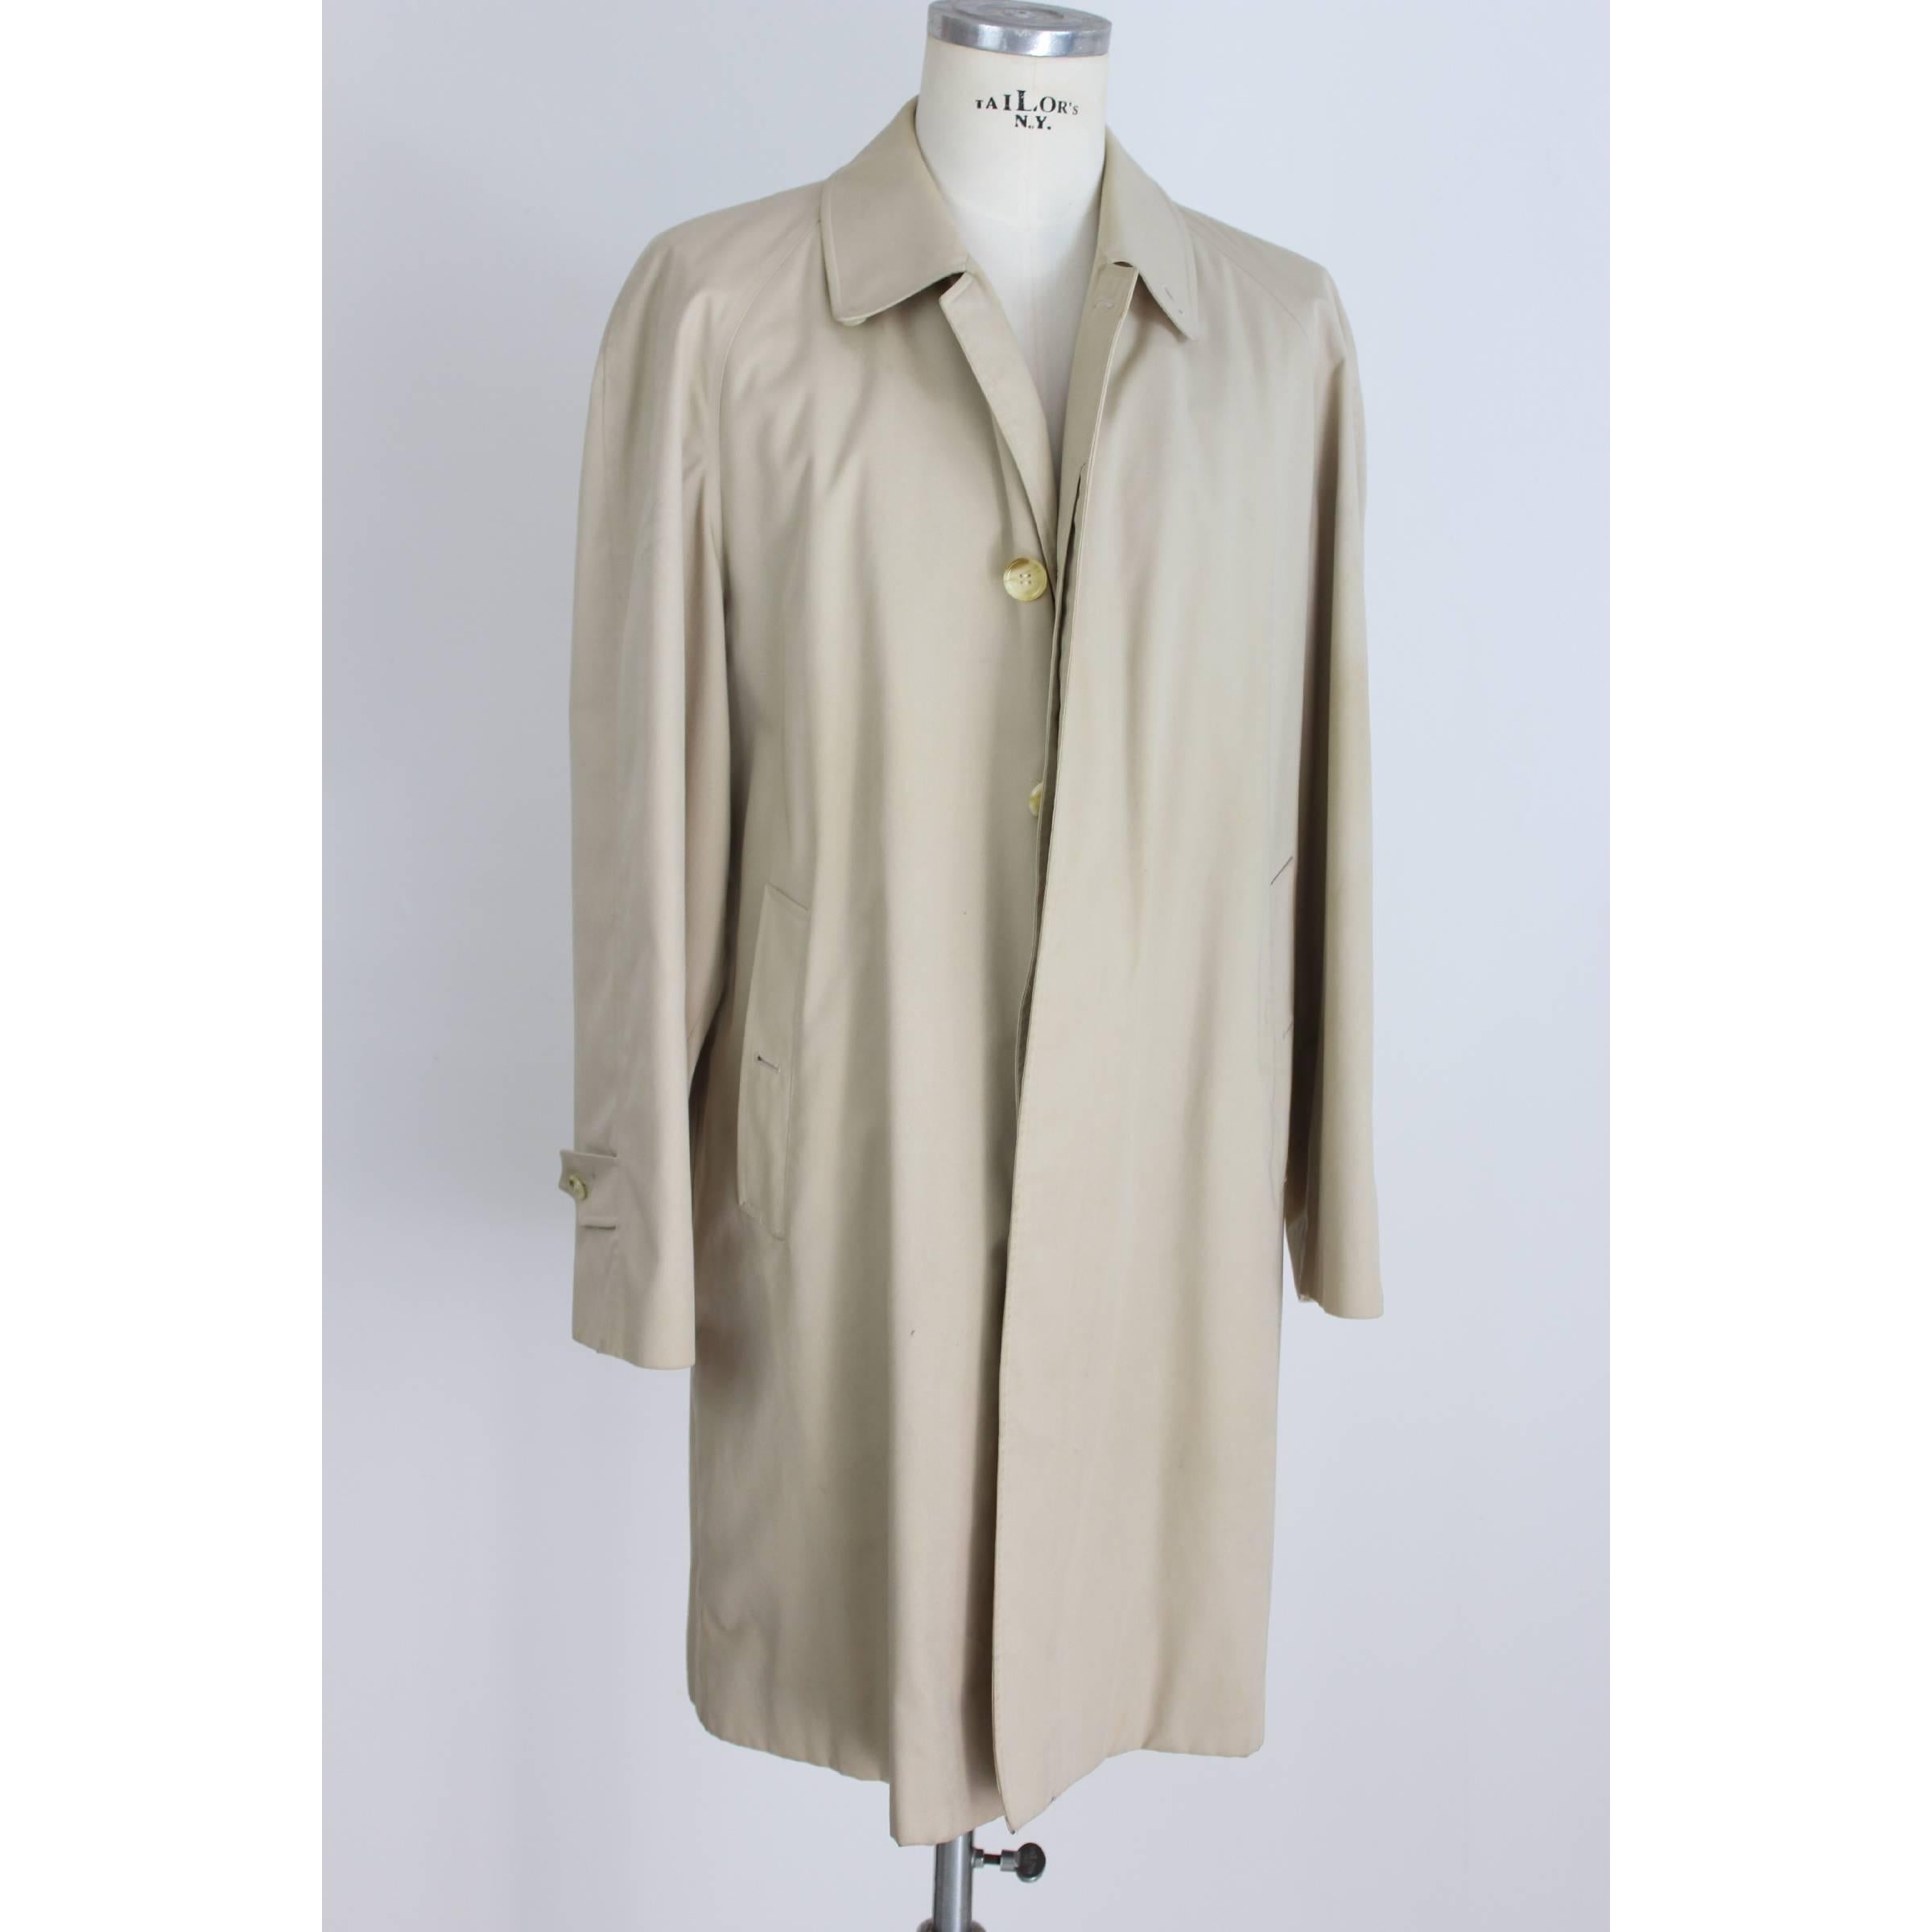  Burberry London Raincoat Trench Cotton Vintage Beige In Good Condition For Sale In Brindisi, IT